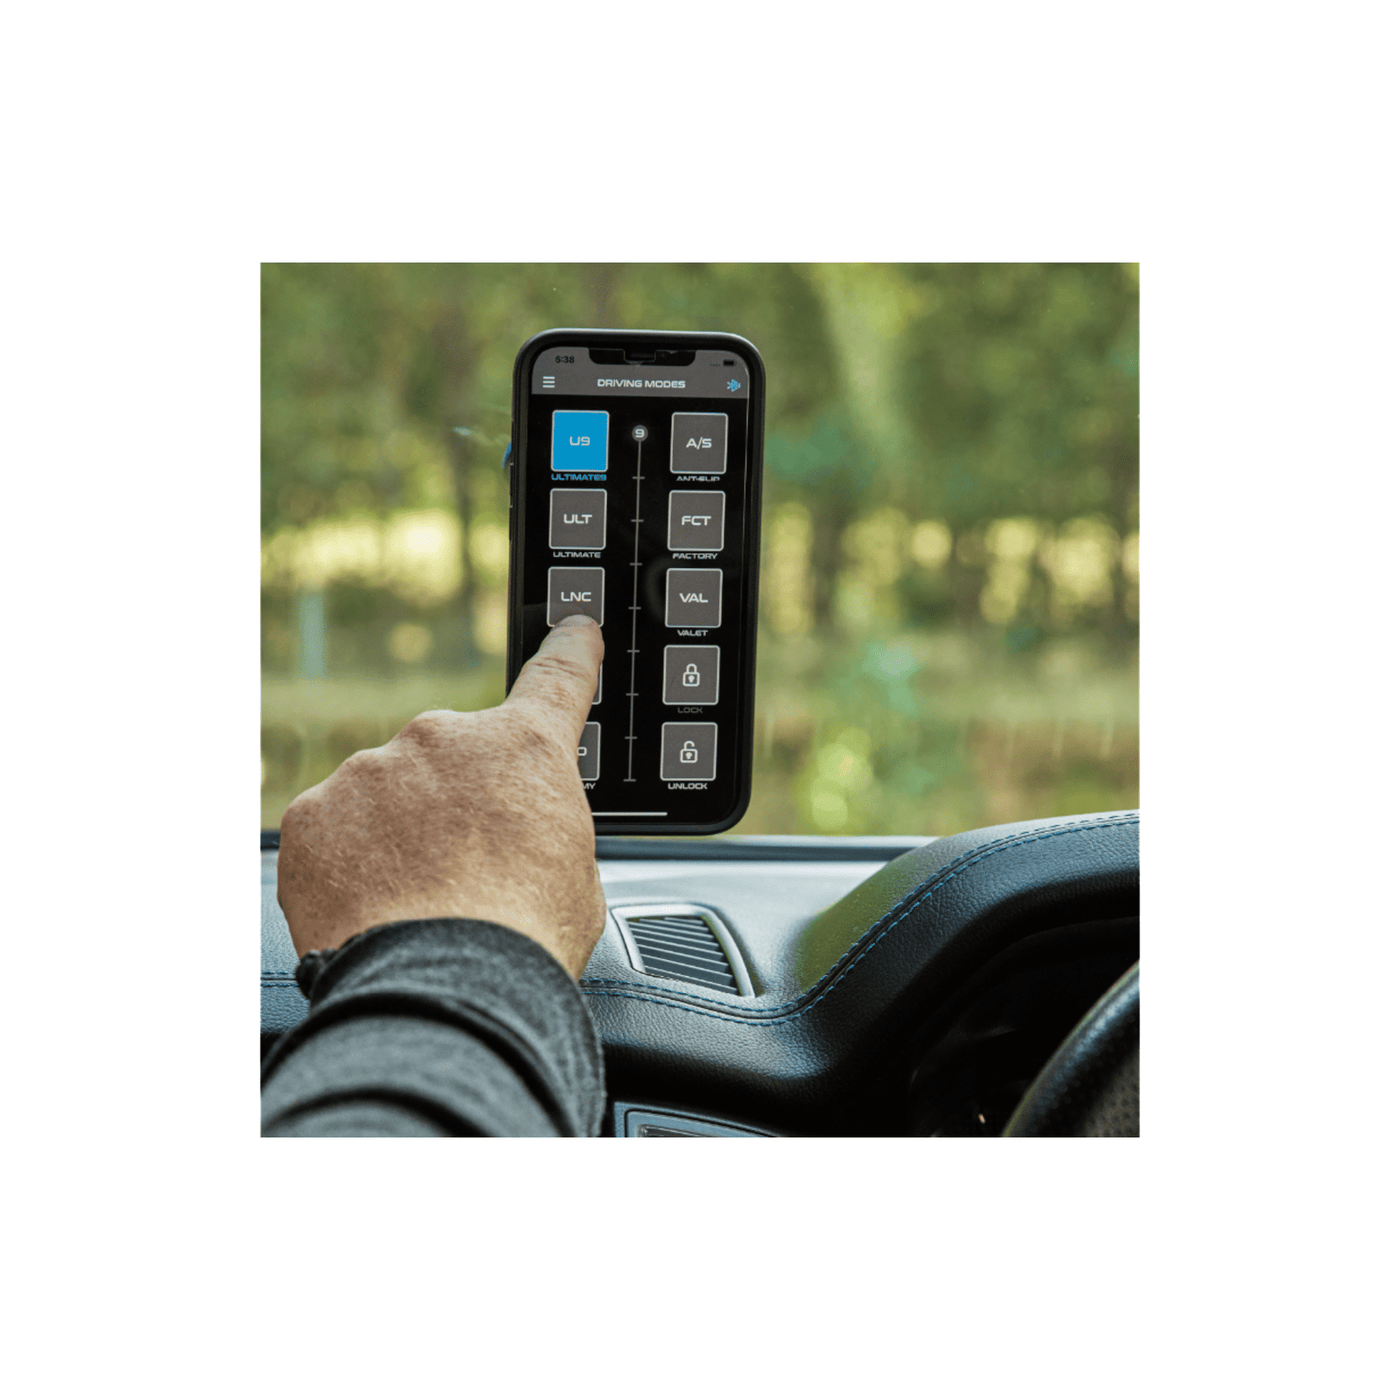 EVCX Throttle Controller to Suit various Holden & MG vehicles - OZI4X4 PTY LTD